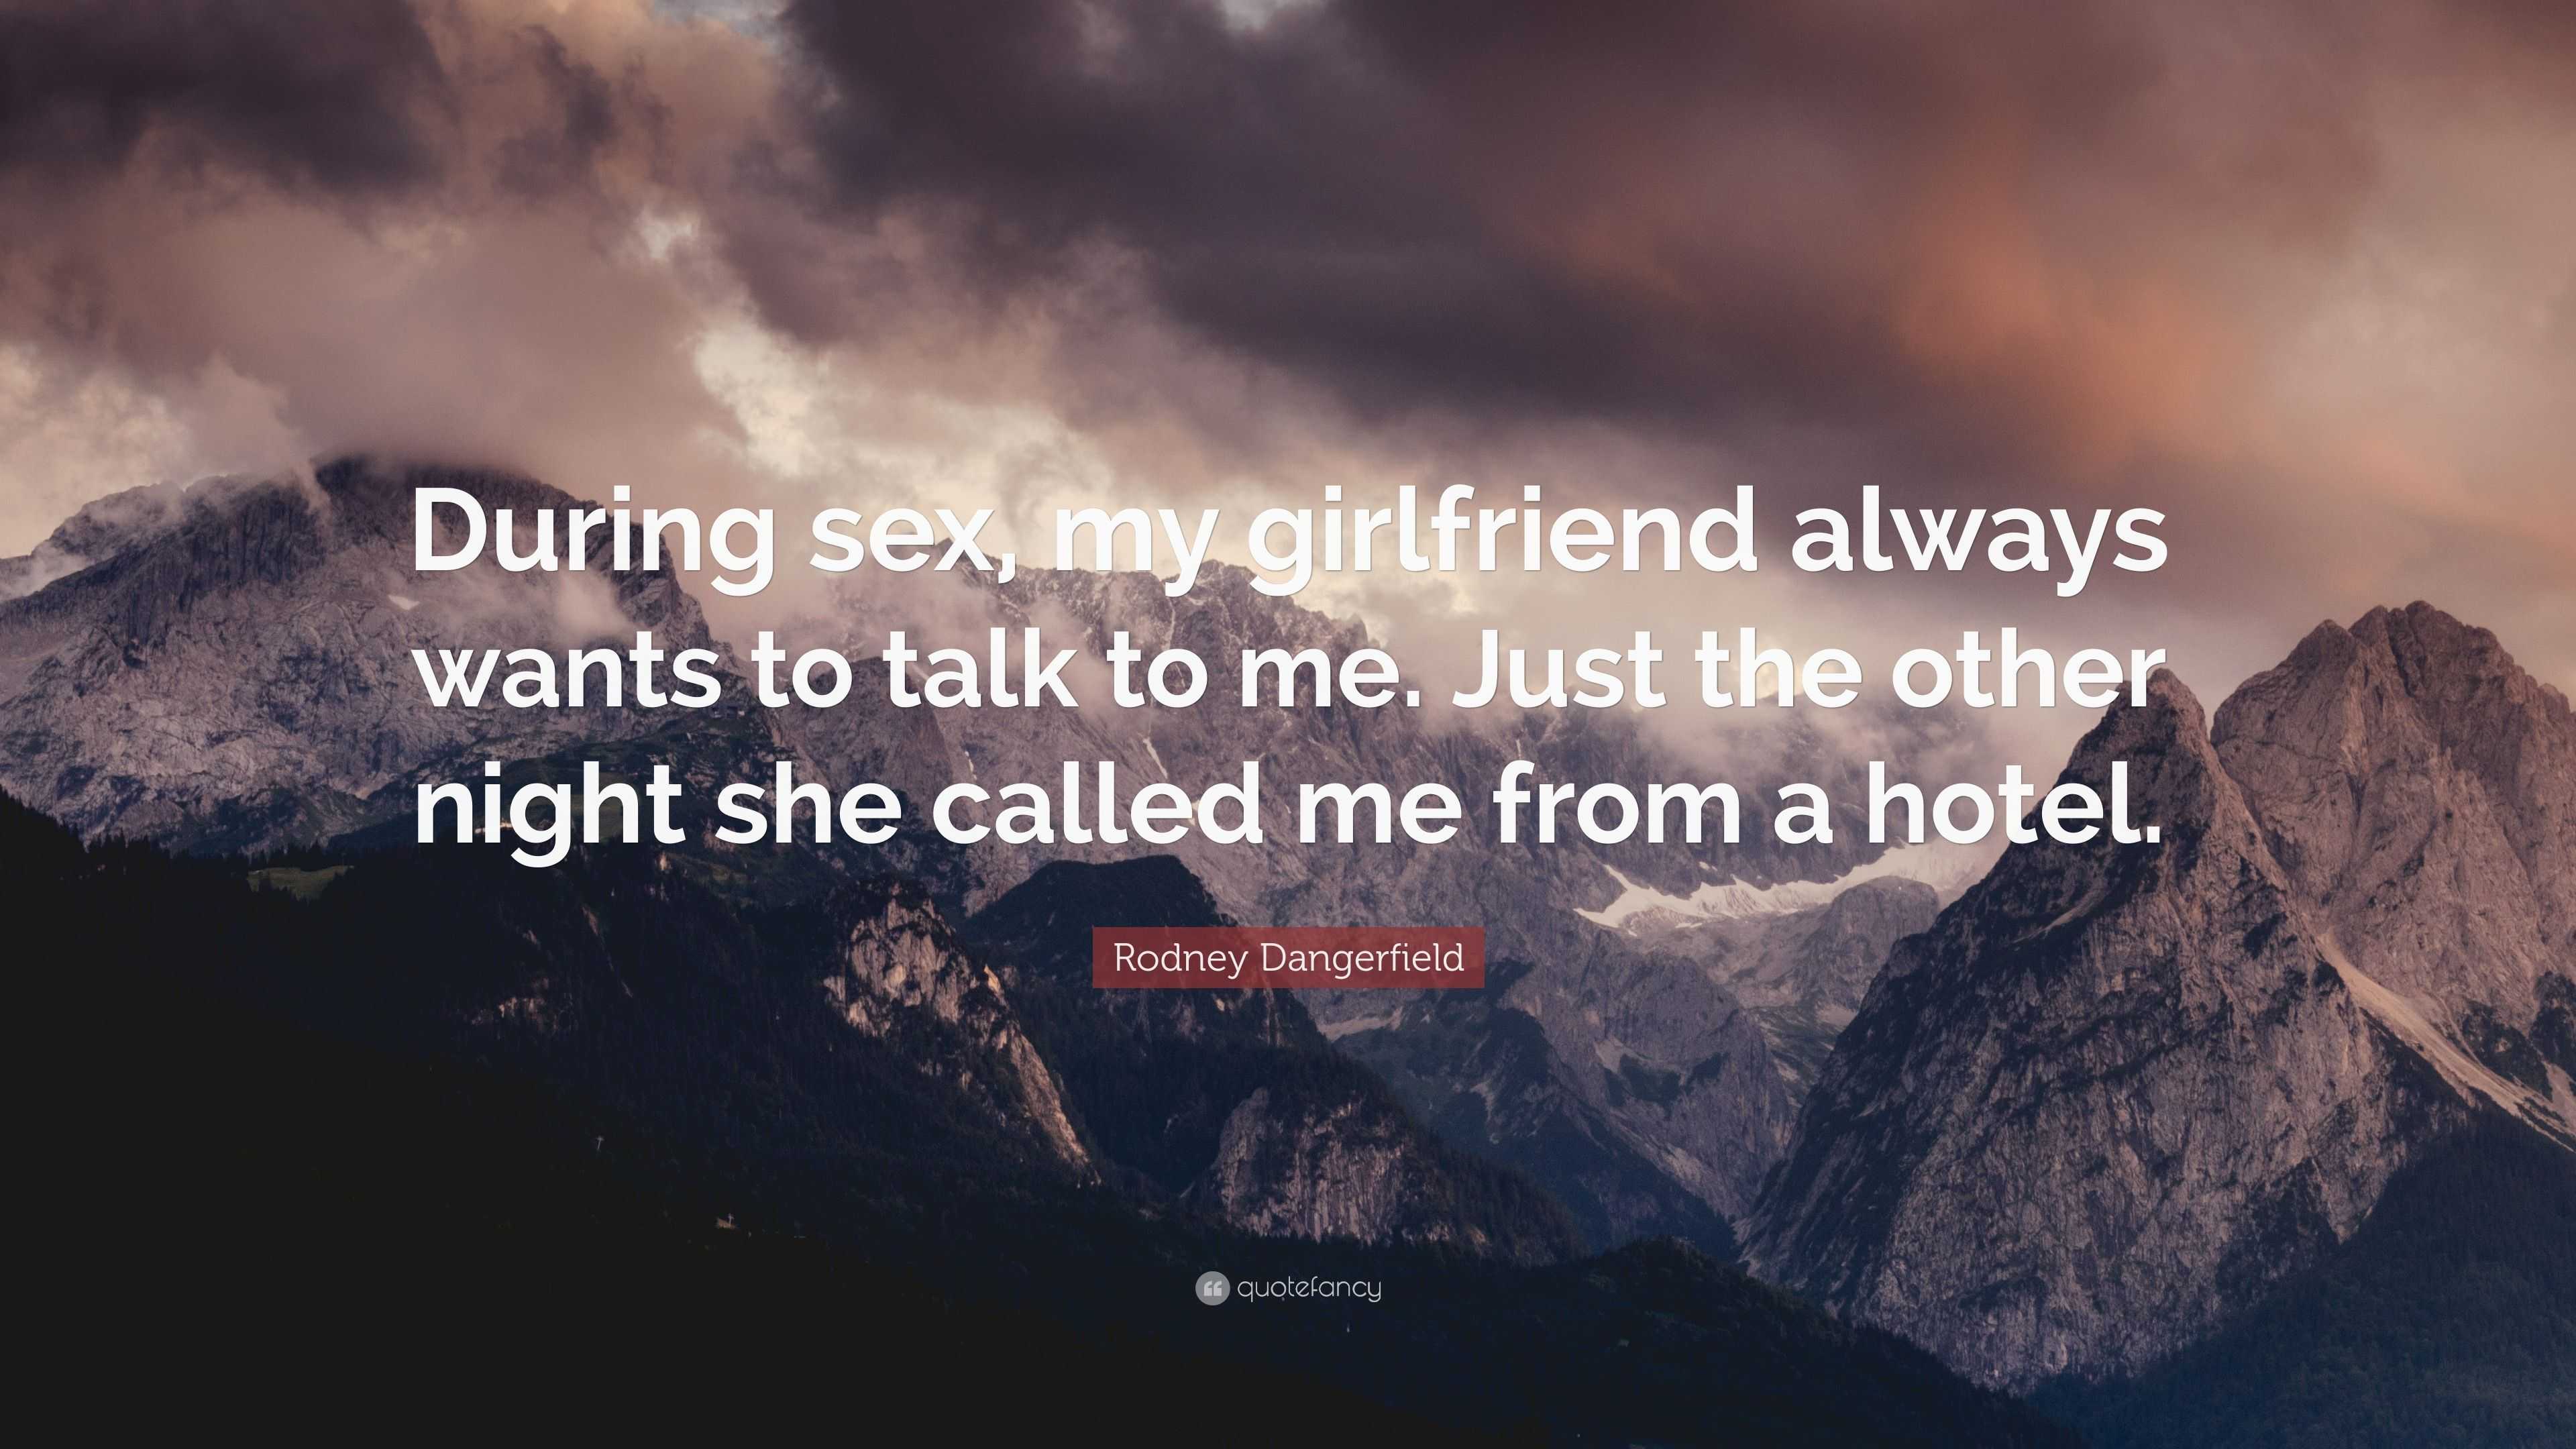 Rodney Dangerfield Quote “During sex, my girlfriend always wants to talk to me photo image